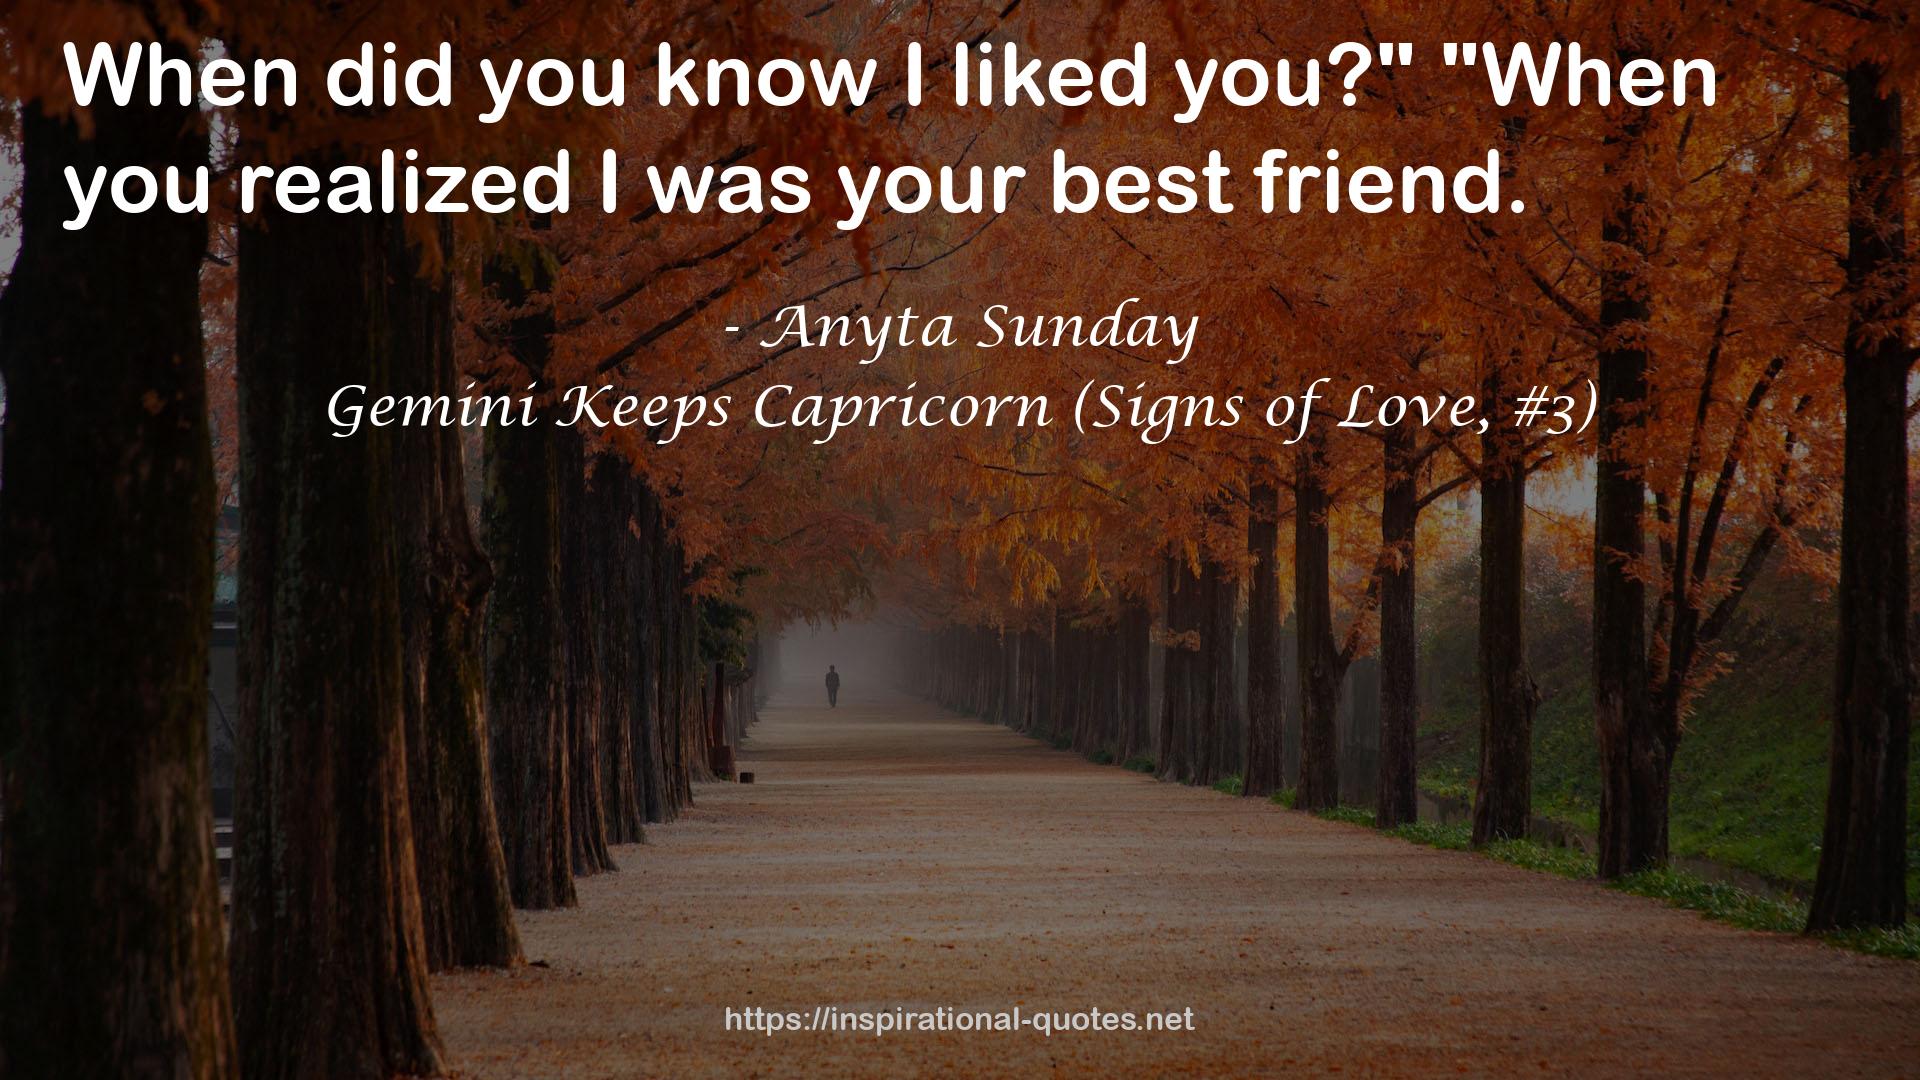 Gemini Keeps Capricorn (Signs of Love, #3) QUOTES